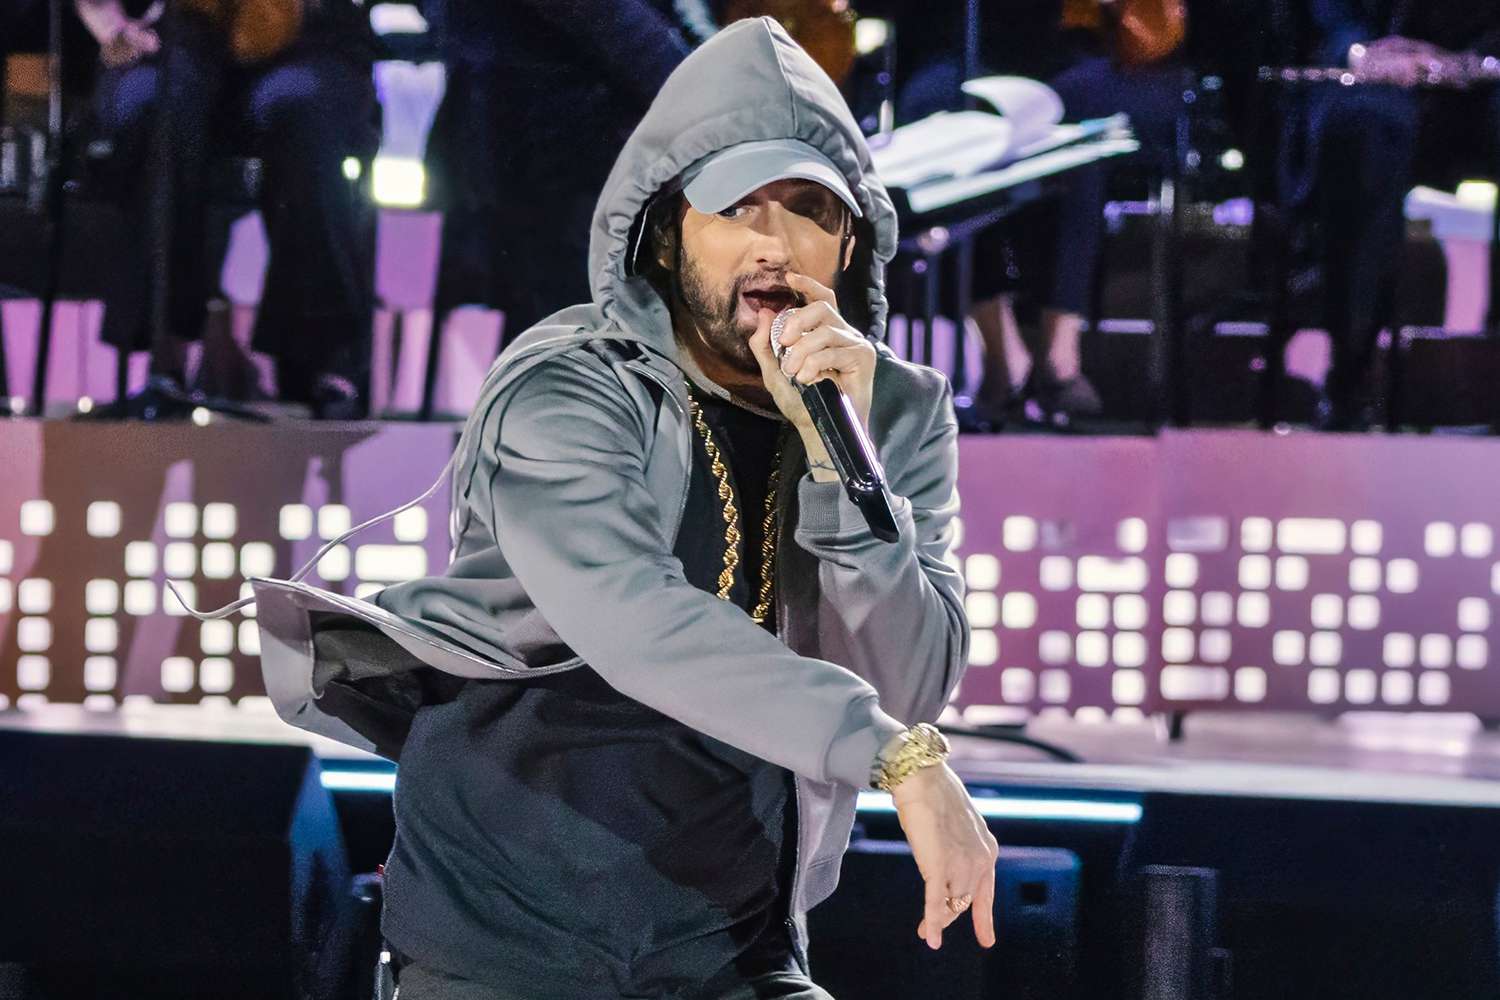 Eminem Pulls a 'Houdini' with Surprise Performance at Detroit Concert Event